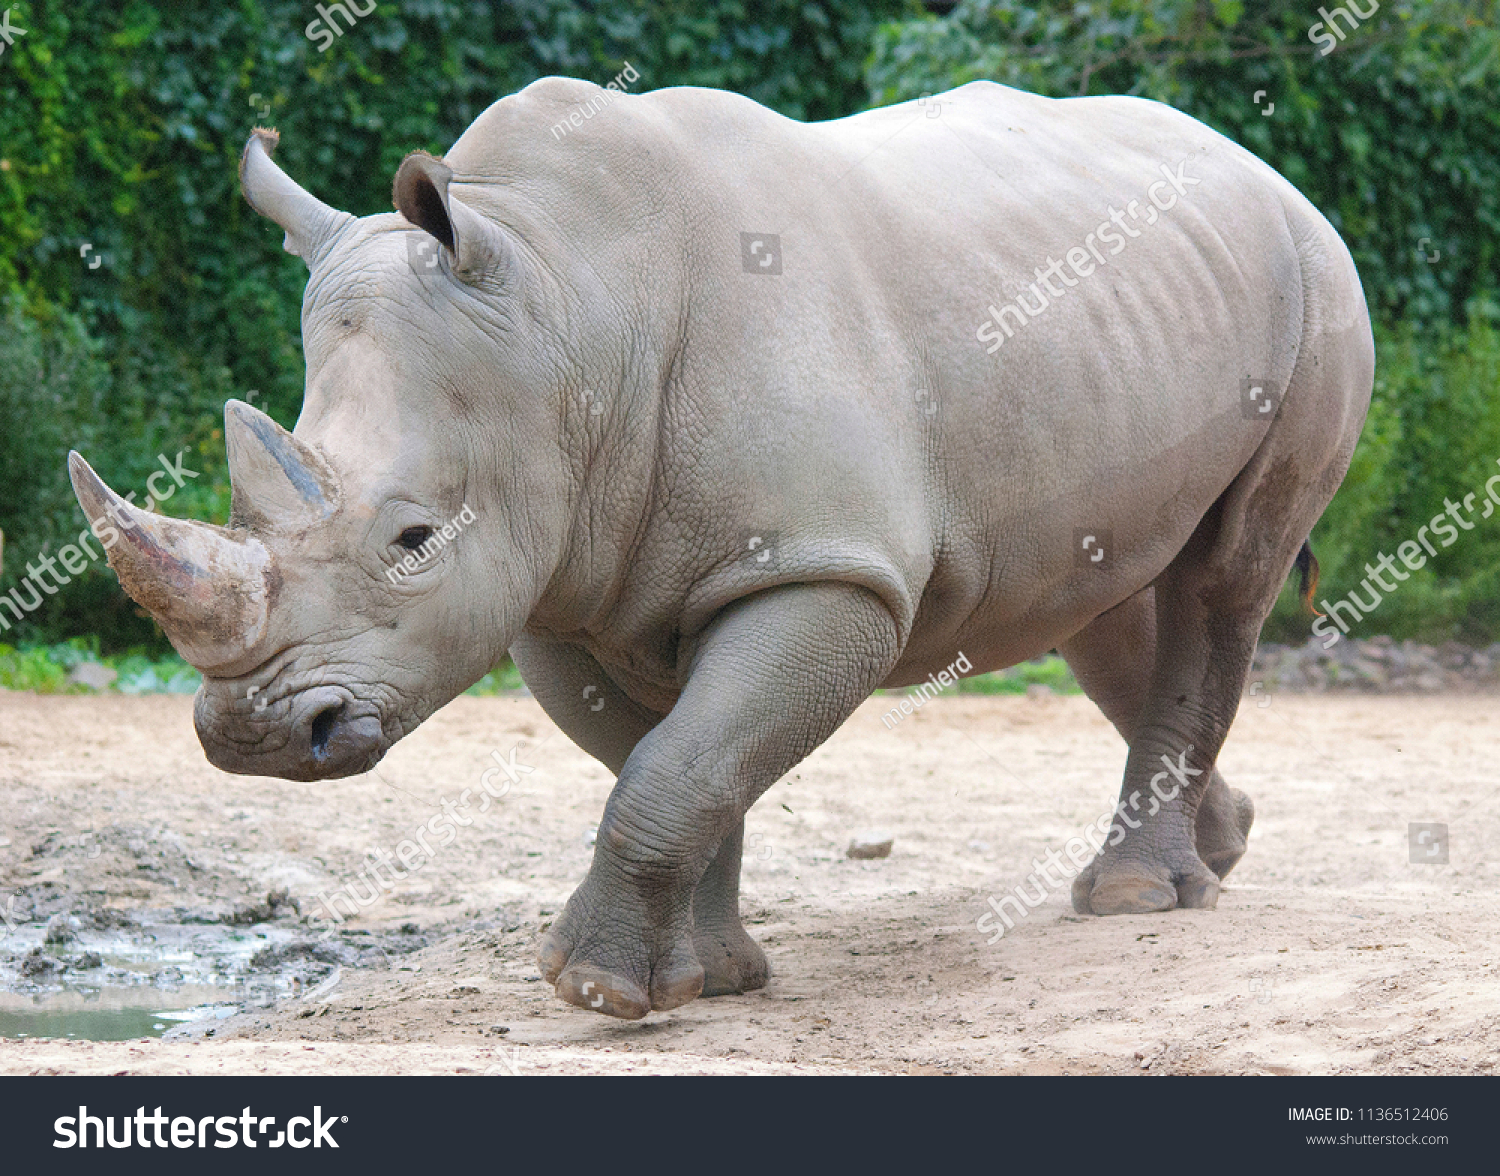 The white rhinoceros or square-lipped rhinoceros is the largest extant species of rhinoceros.  It has a wide mouth used for grazing and is the most social of all rhino species #1136512406